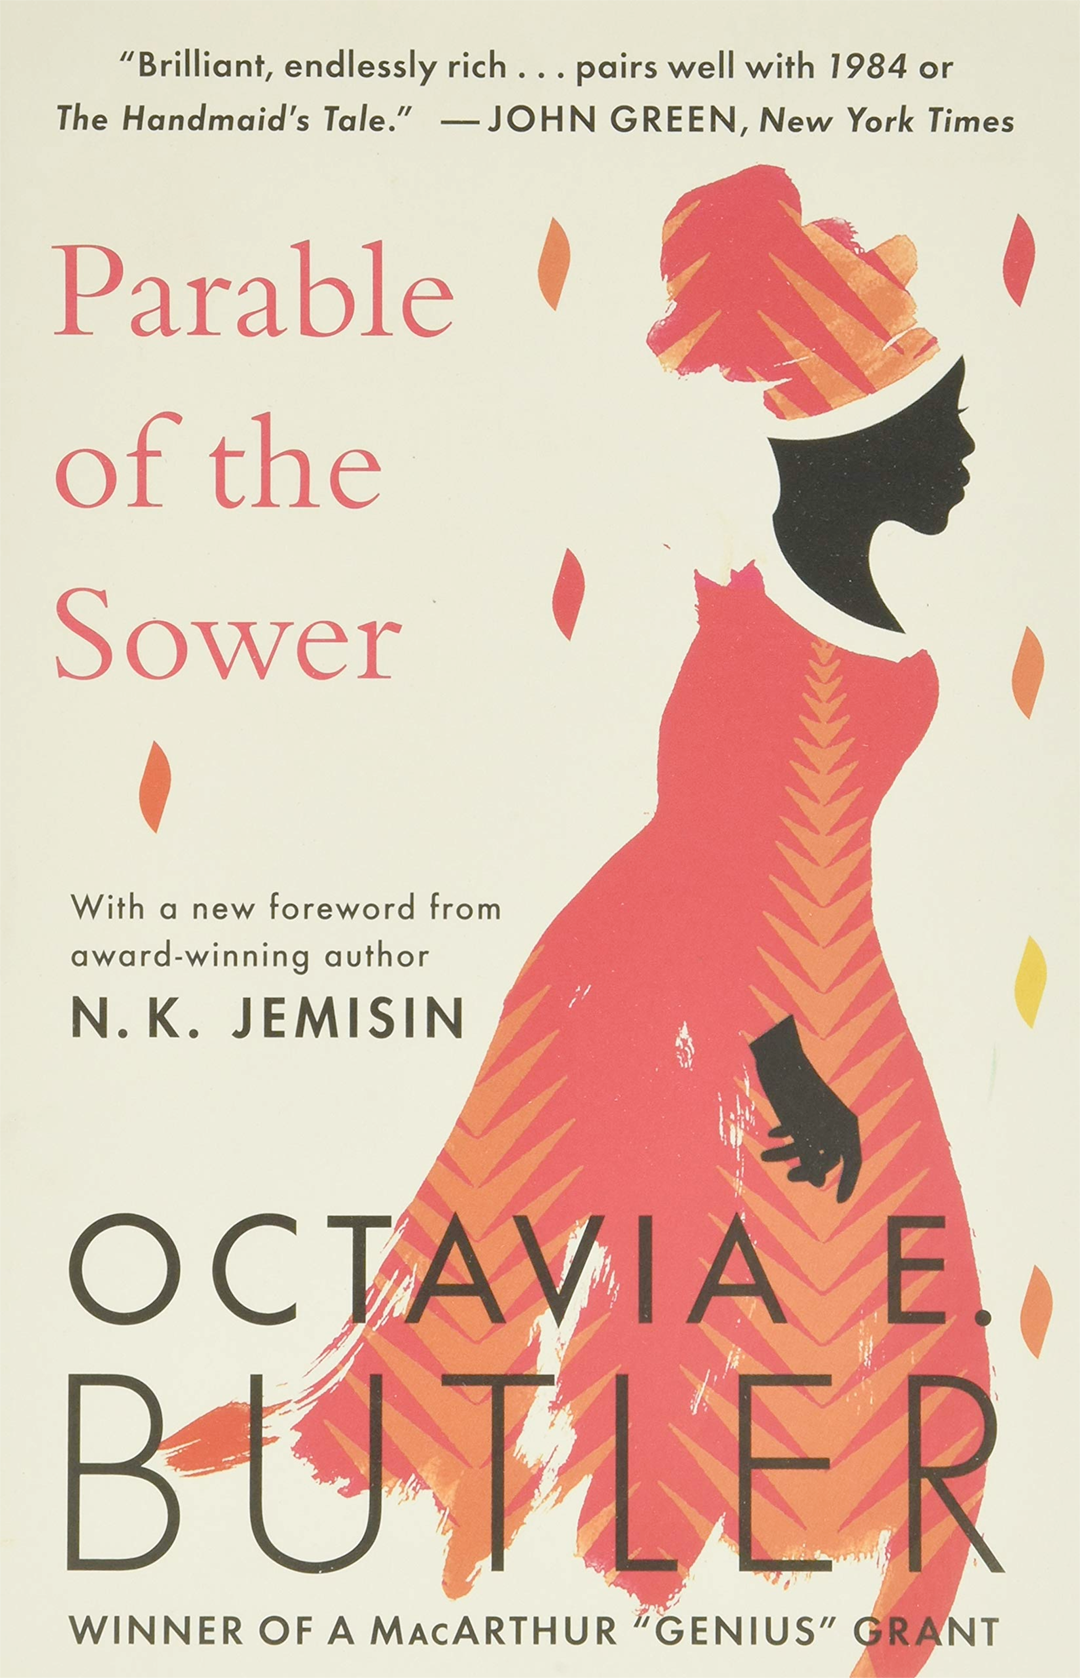 Front cover of 'Parable of the Sower' by Octavia E. Butler, with an illustration of a black woman in profile wearing a read dress and a read cloth on her head.